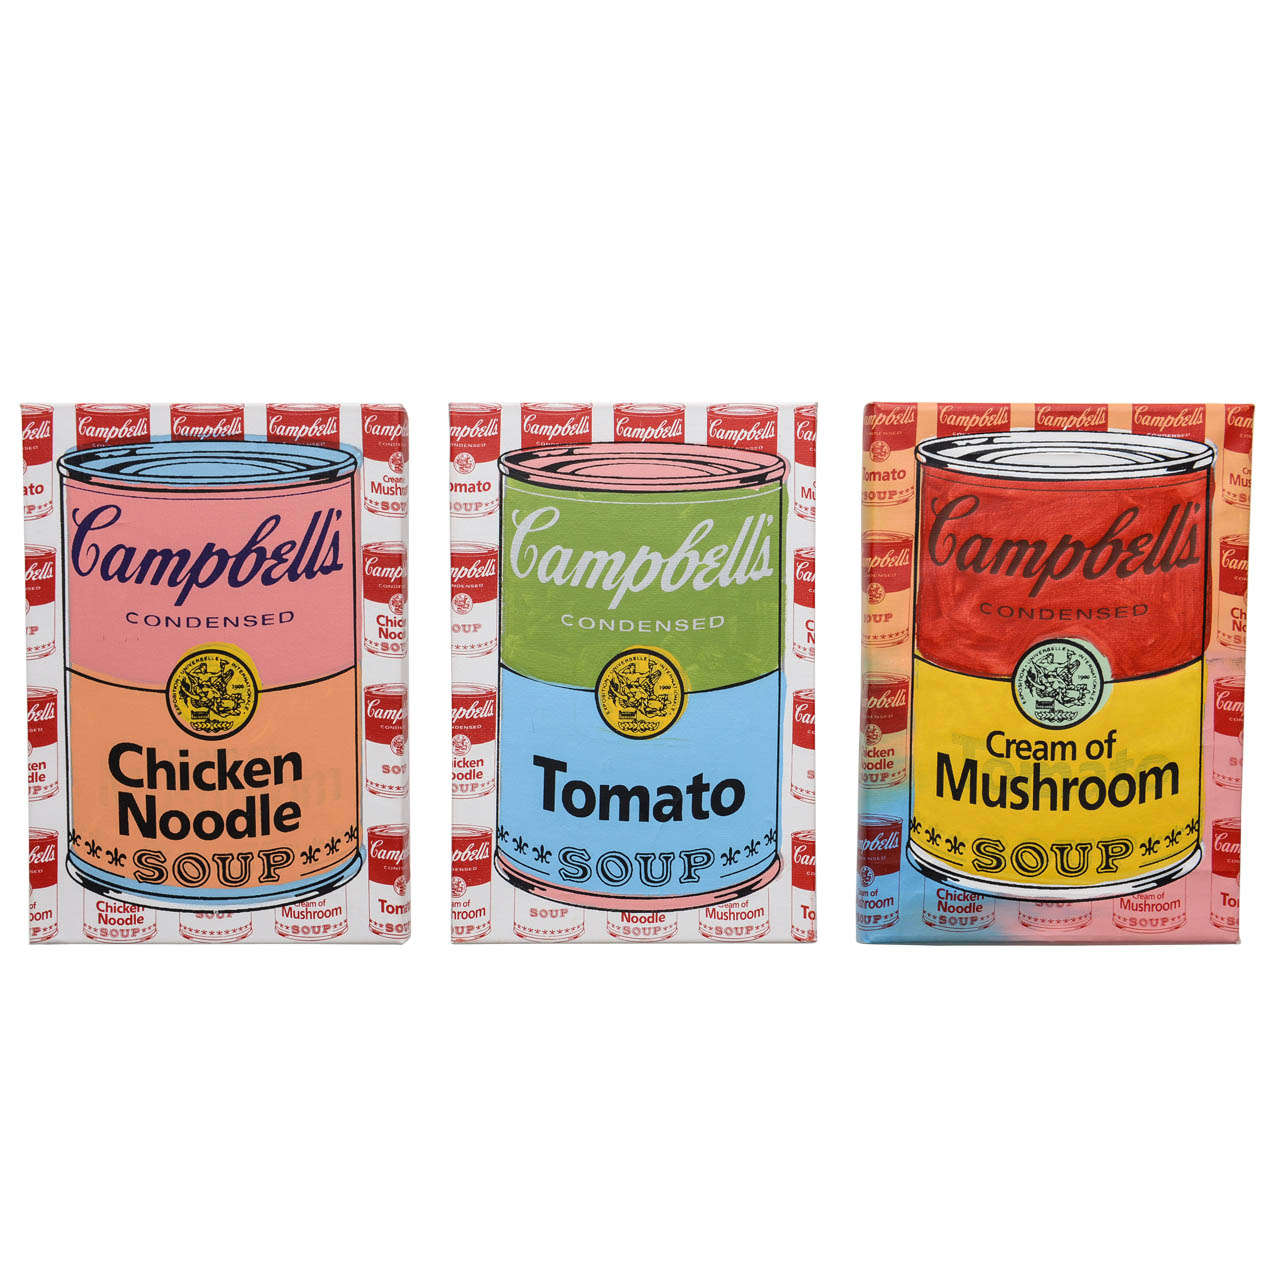 Series of 3 Steve Kaufman Campbell's Soup Cans, 20th Century